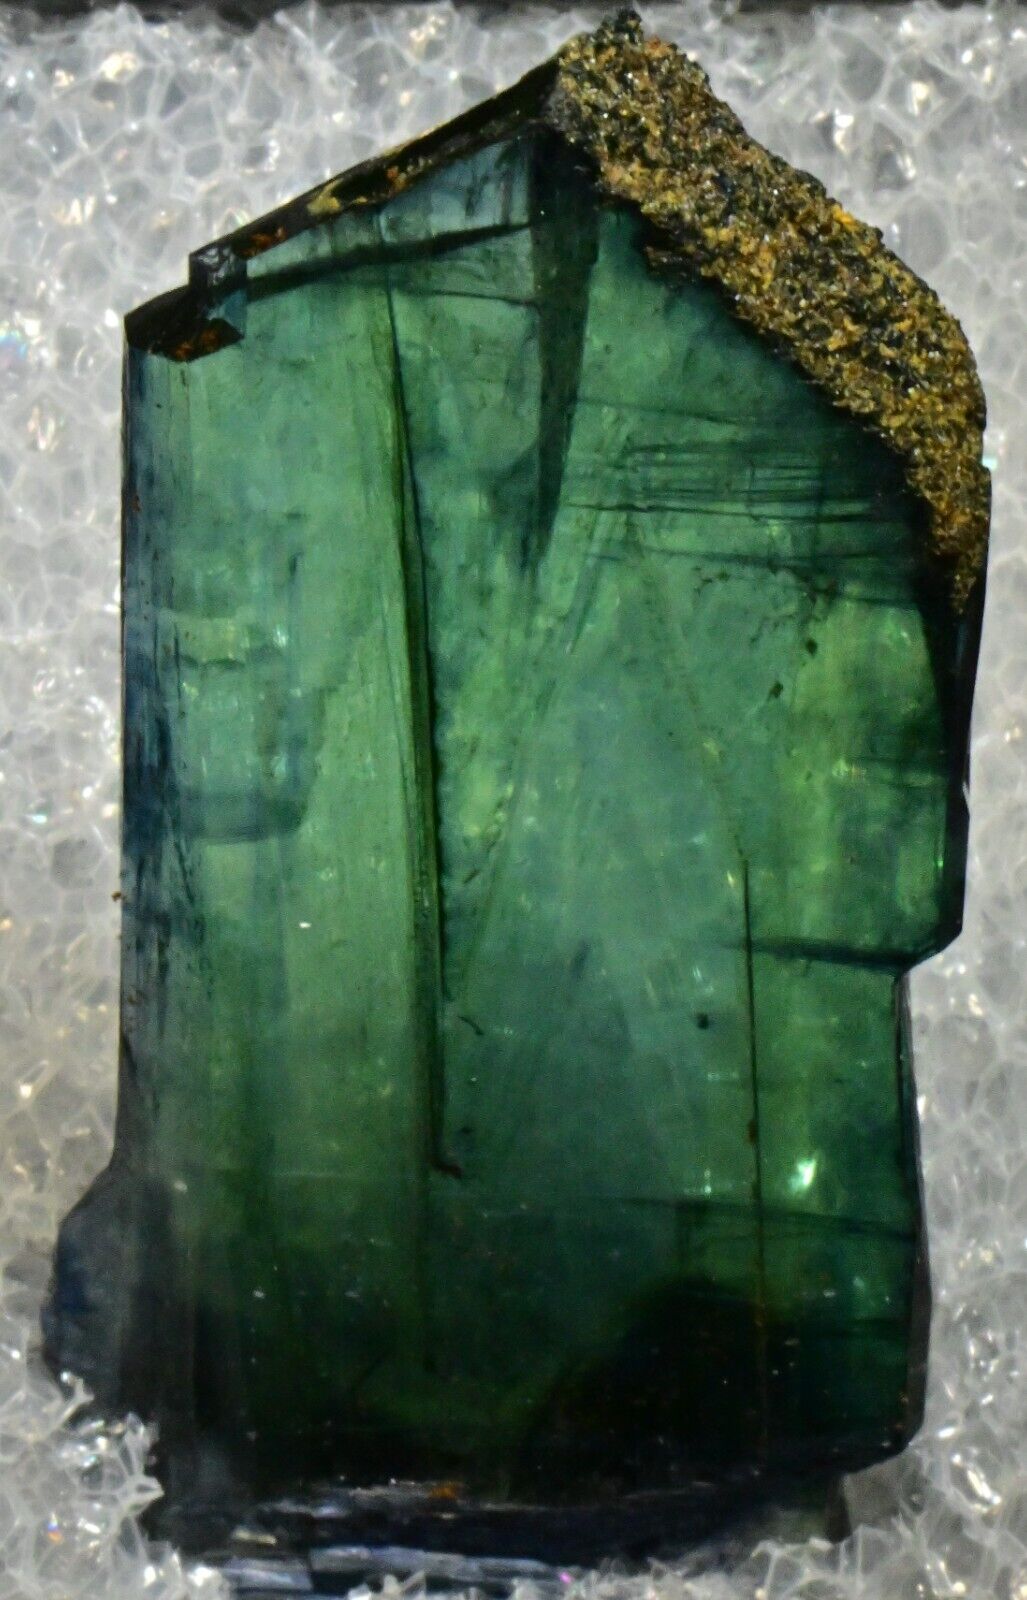 NEW FIND VIVIANITE 1.5 X 4 CM HIGH BEAUTIFUL CRYSTAL GEM. FROM BRAZIL